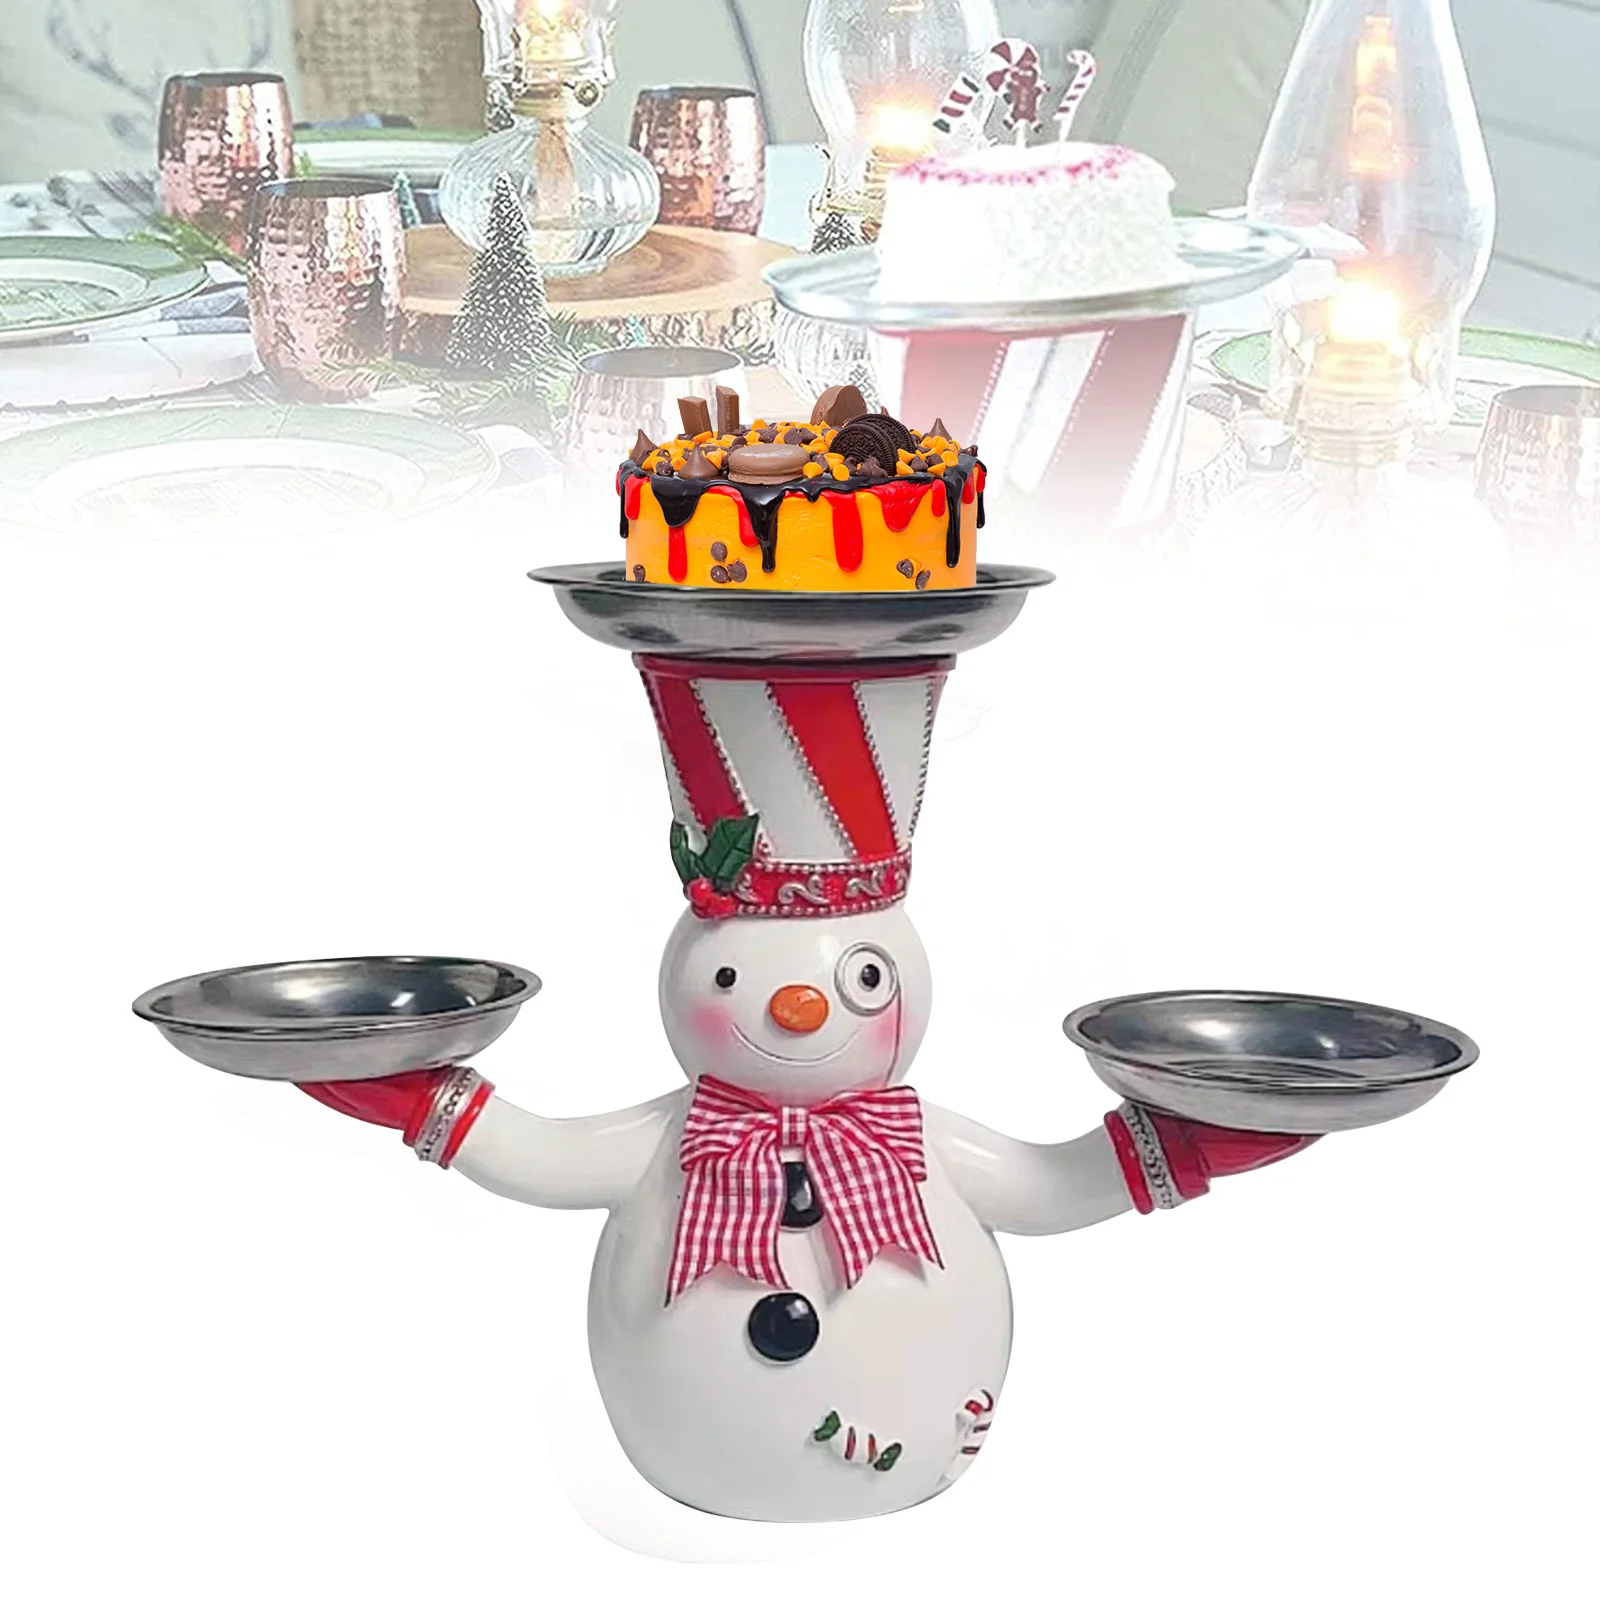 

Cute Snowman Treats Holder with Plates Snack Cupcake Dessert Food Bowl Stand Holder Christmas Dinner Party Decorations